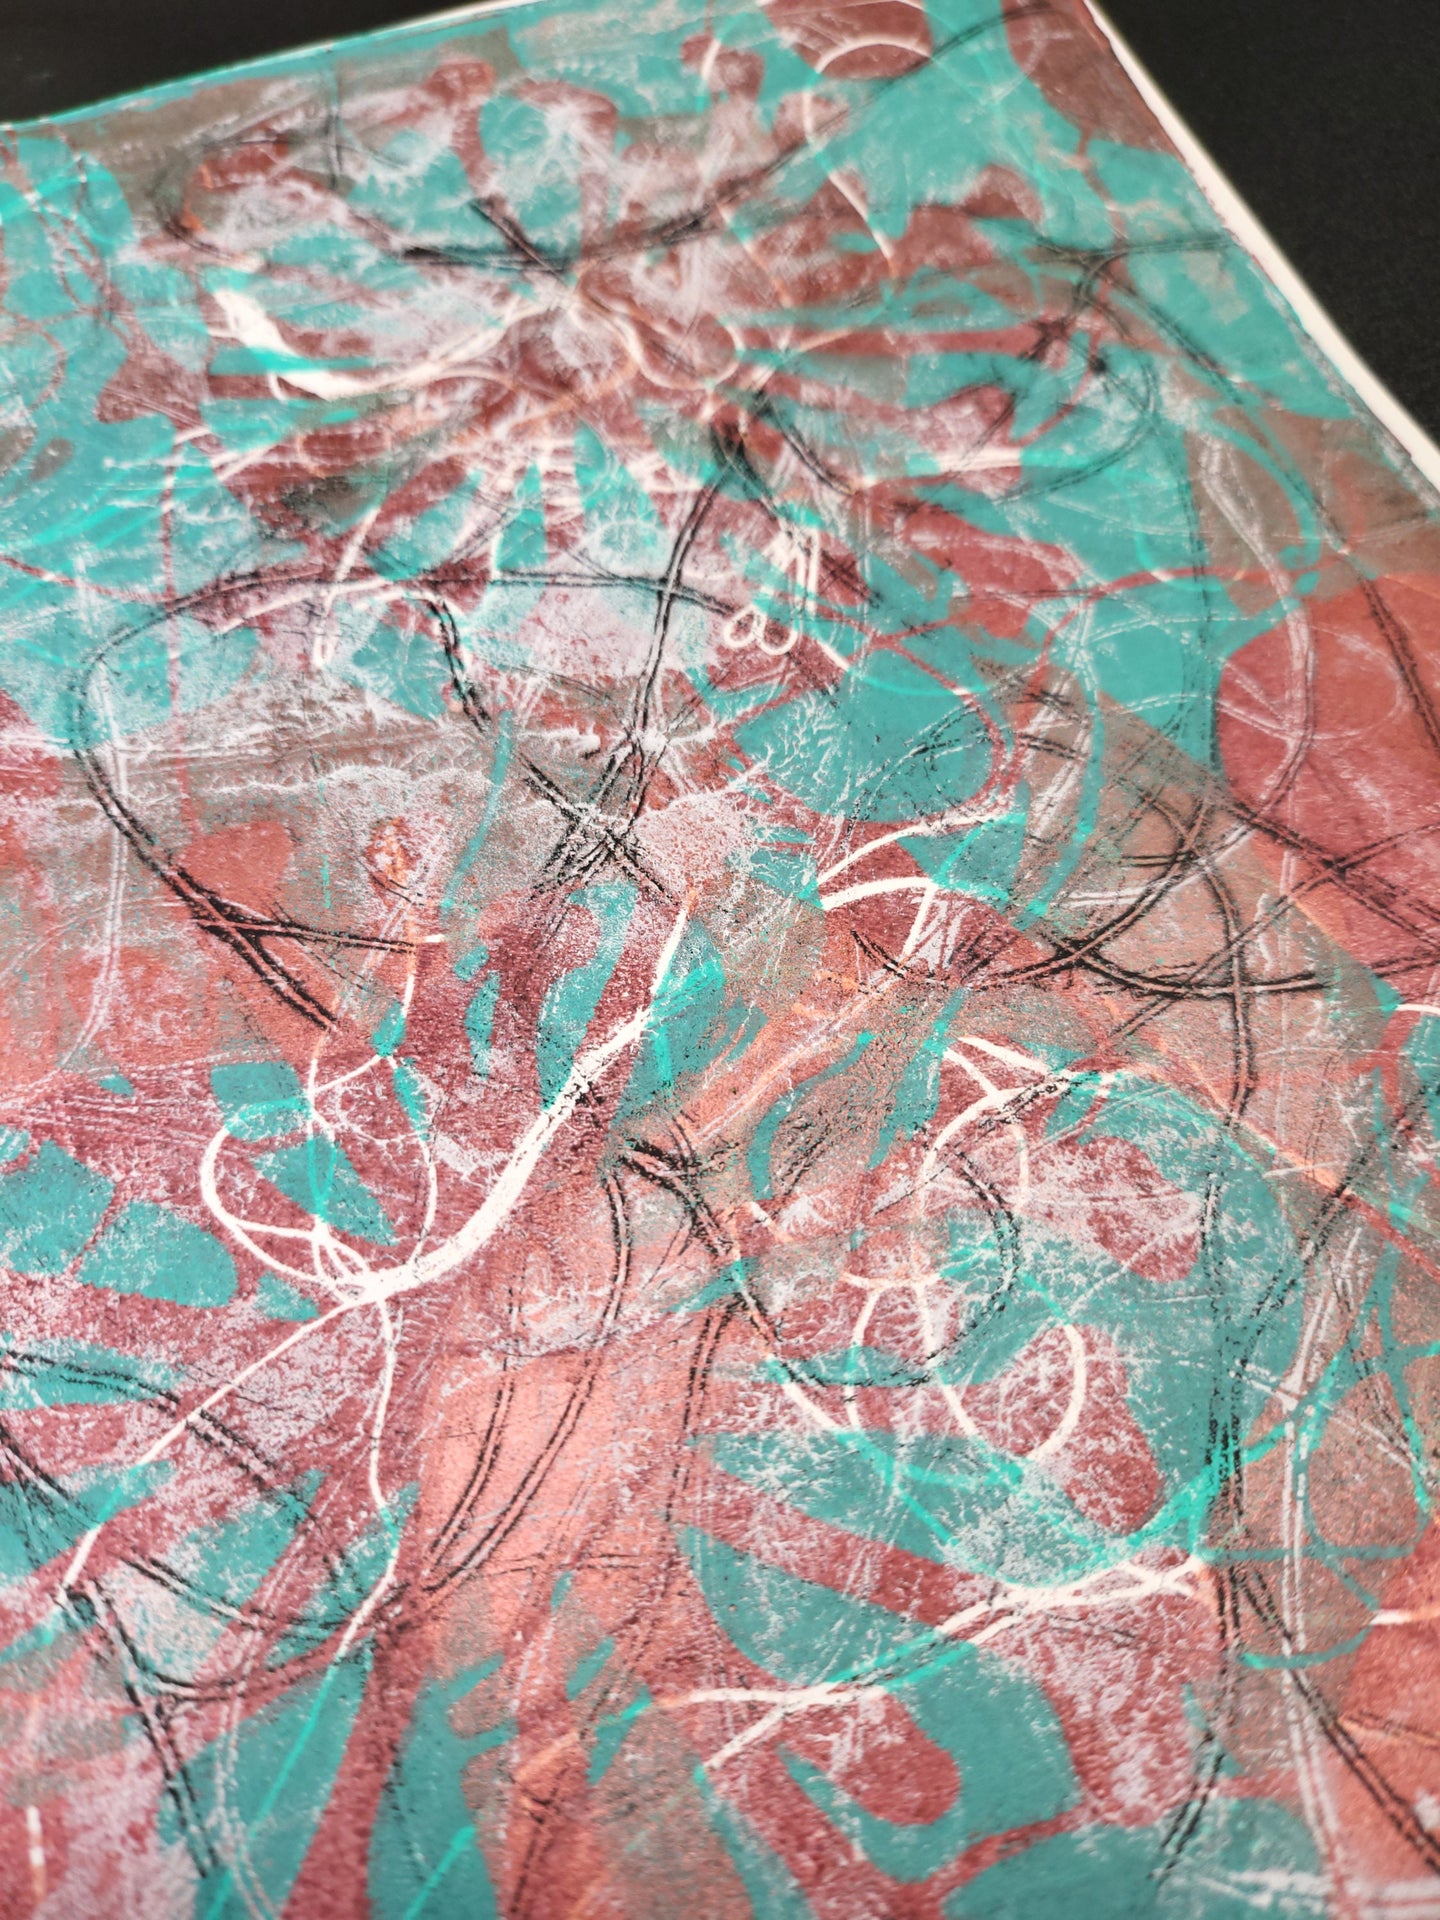 Copper, Teal, White String 8.5x11